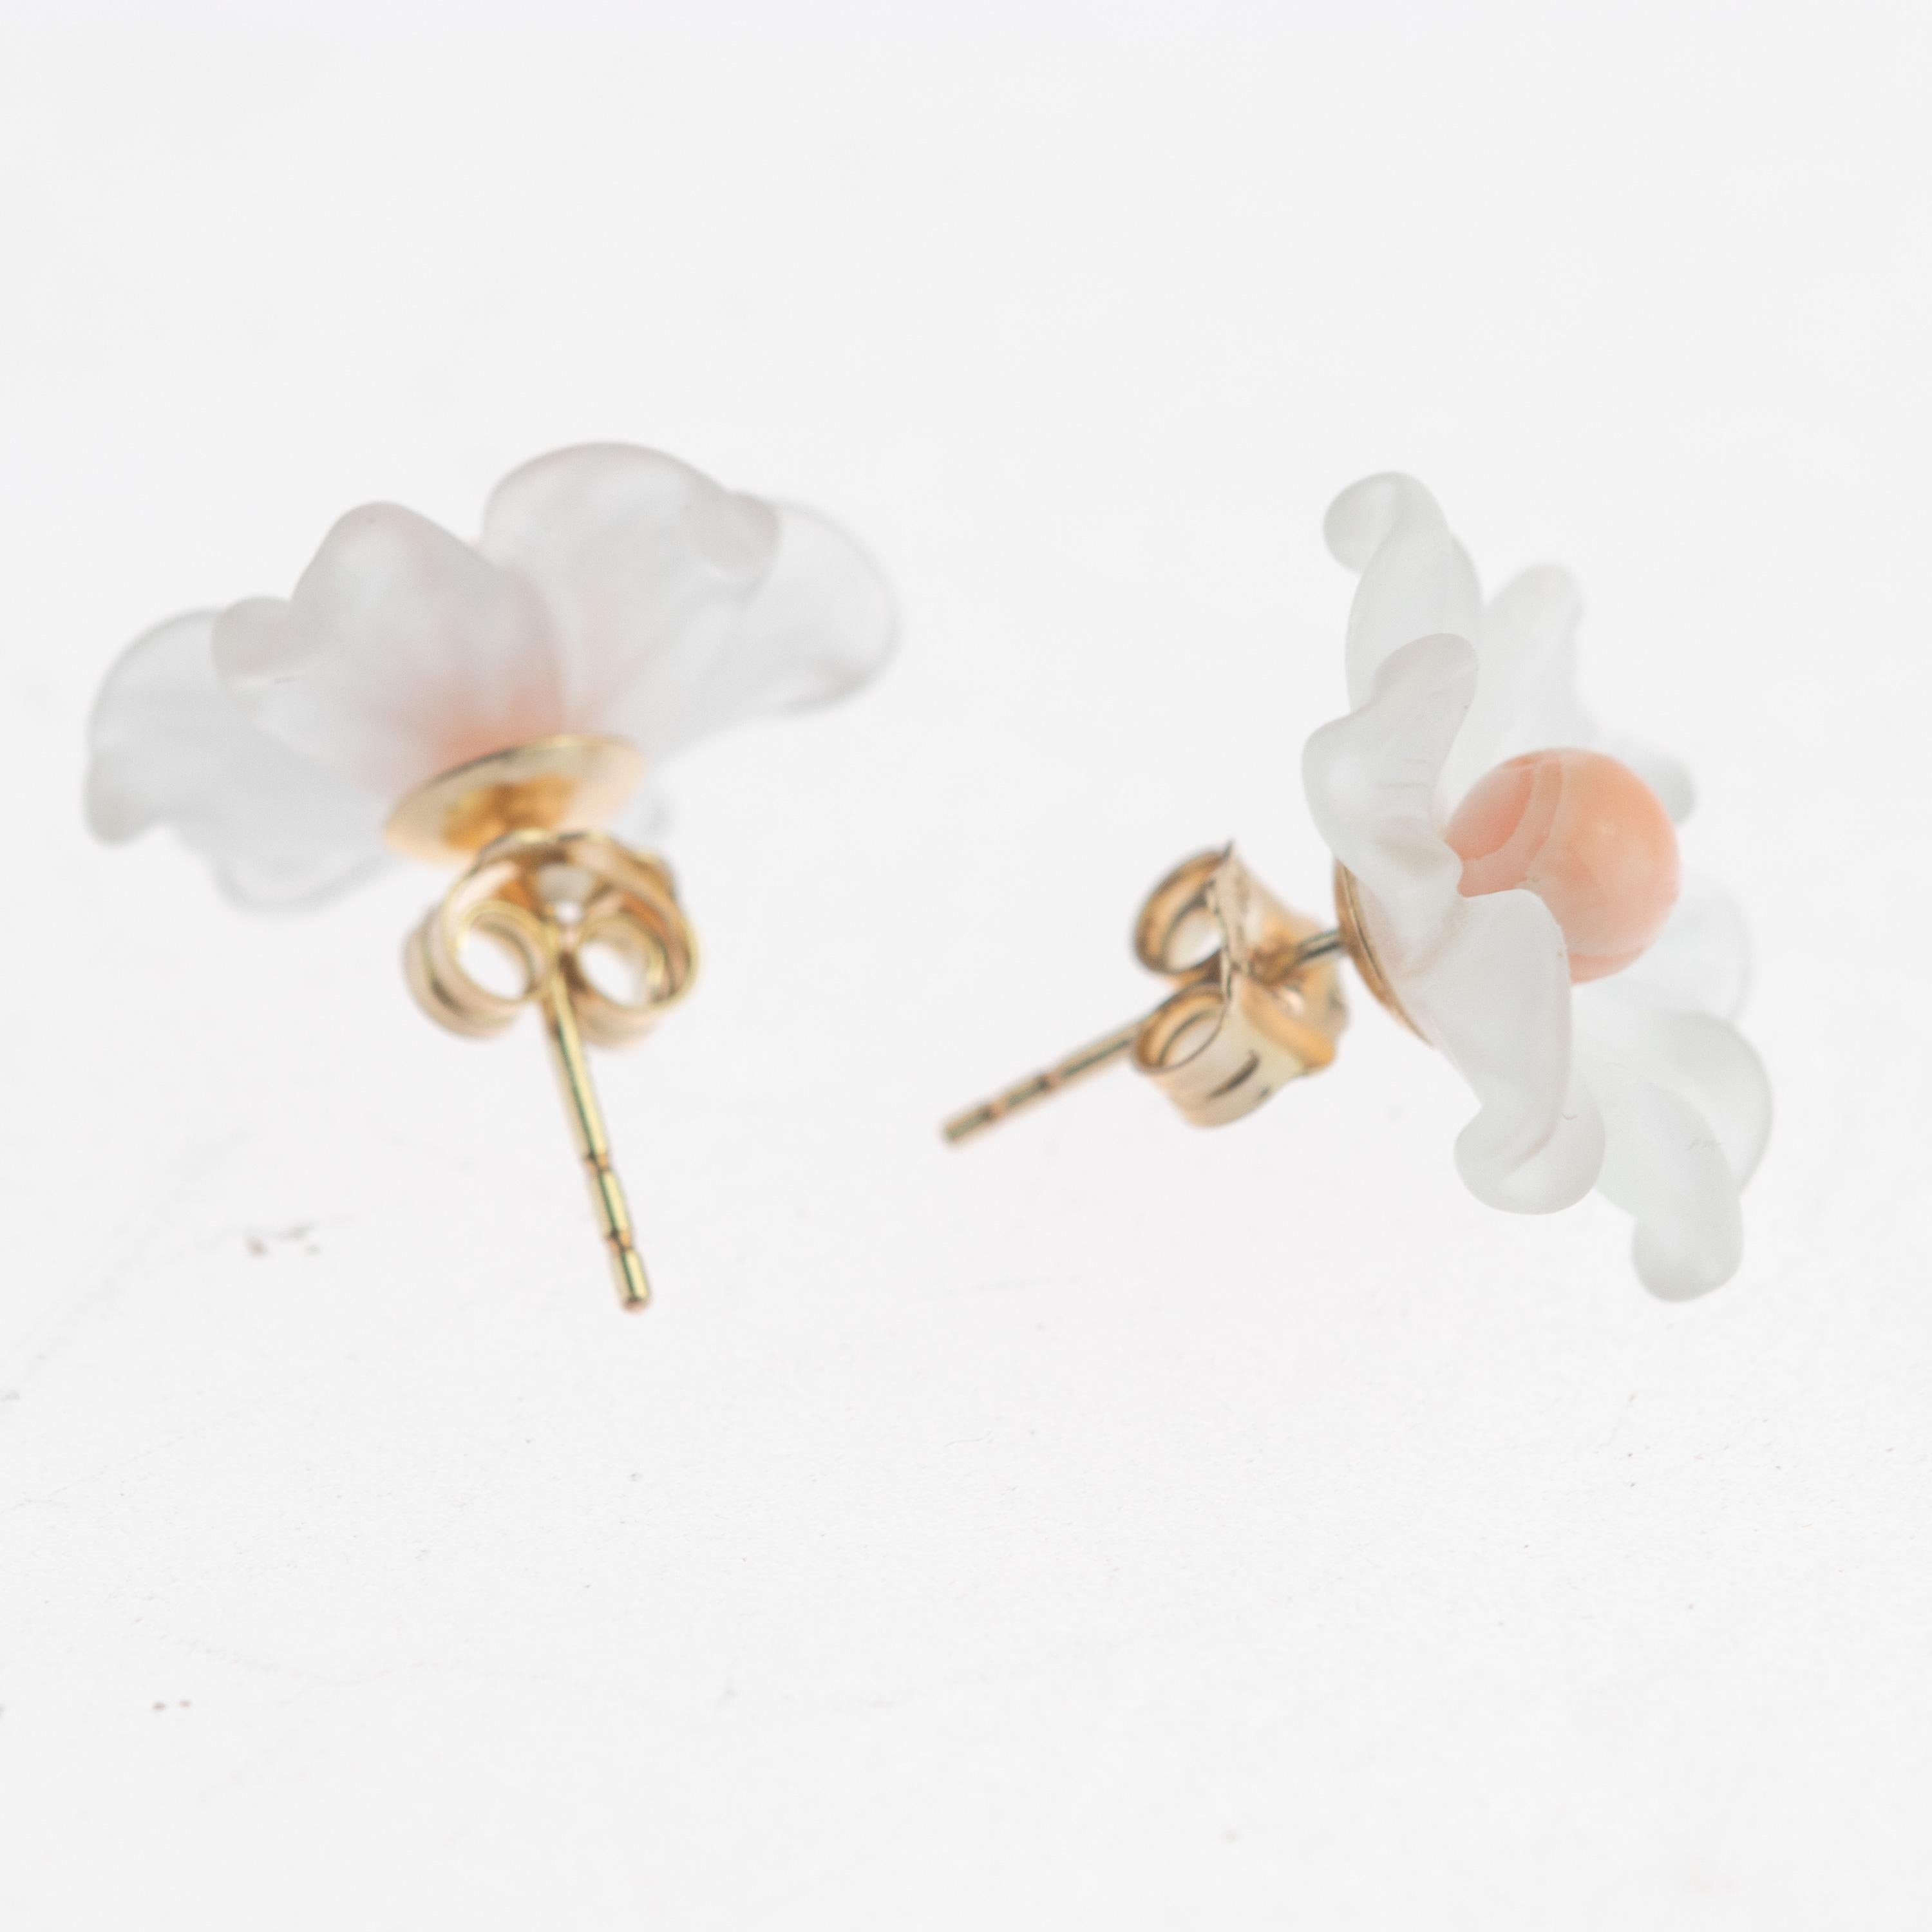 Astonishing and delicate 5.5 ct rock crystal flower. Stud earrings with a coral bead in the middle. Carved petals that evoke the italian handmade traditional jewelry work, wrapping itself in a soft look enriched with  14 Karat gold manifesting